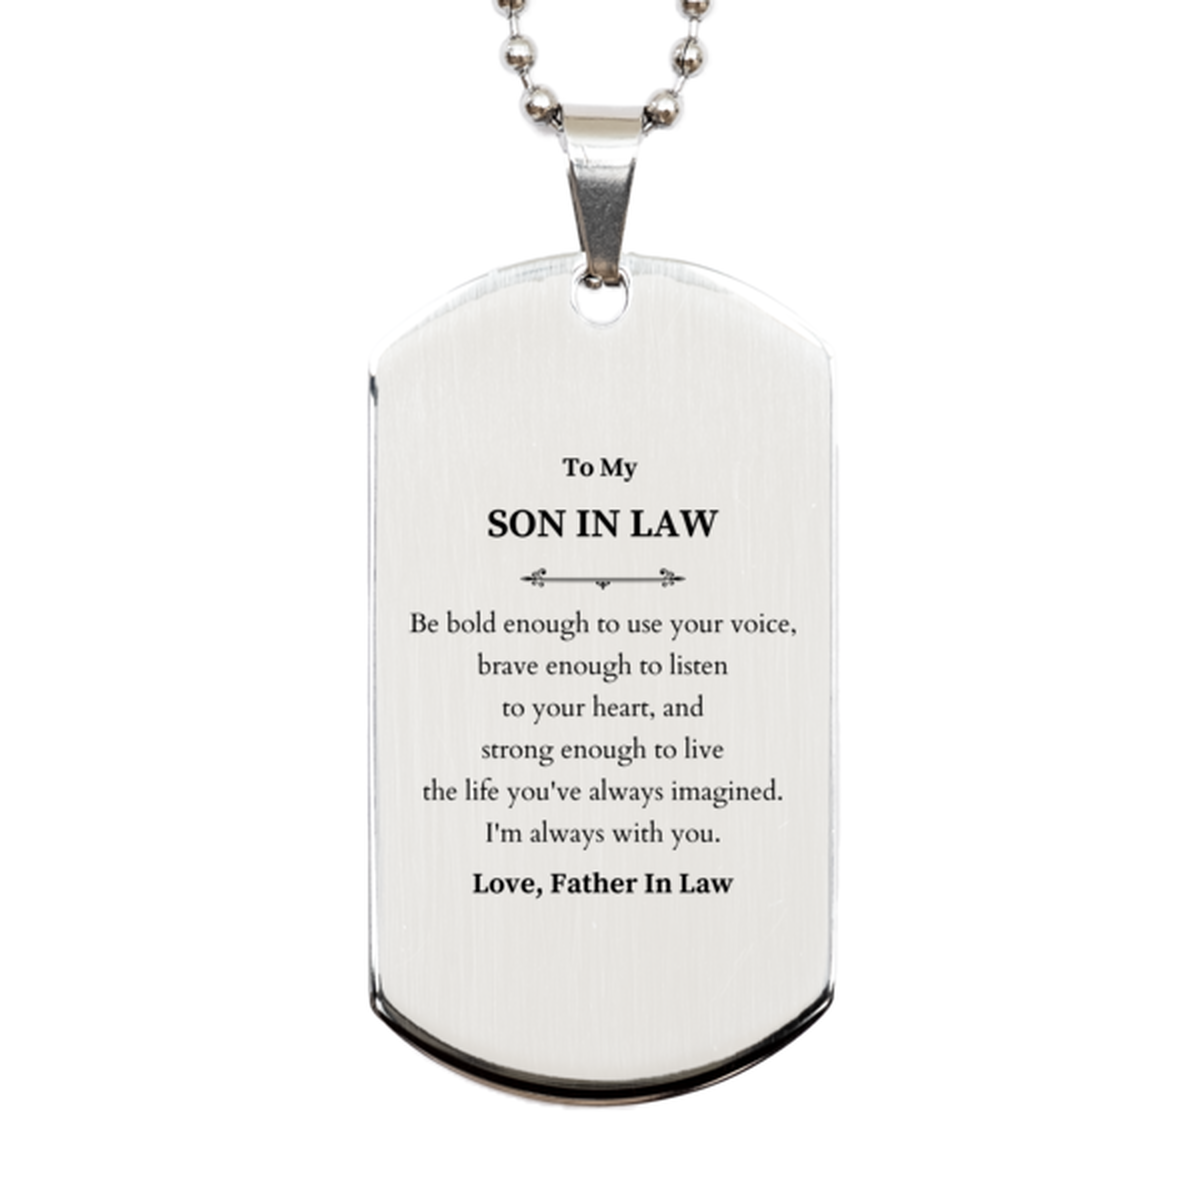 Keepsake Son In Law Silver Dog Tag Gift Idea Graduation Christmas Birthday Son In Law from Father In Law, Son In Law Be bold enough to use your voice, brave enough to listen to your heart. Love, Father In Law